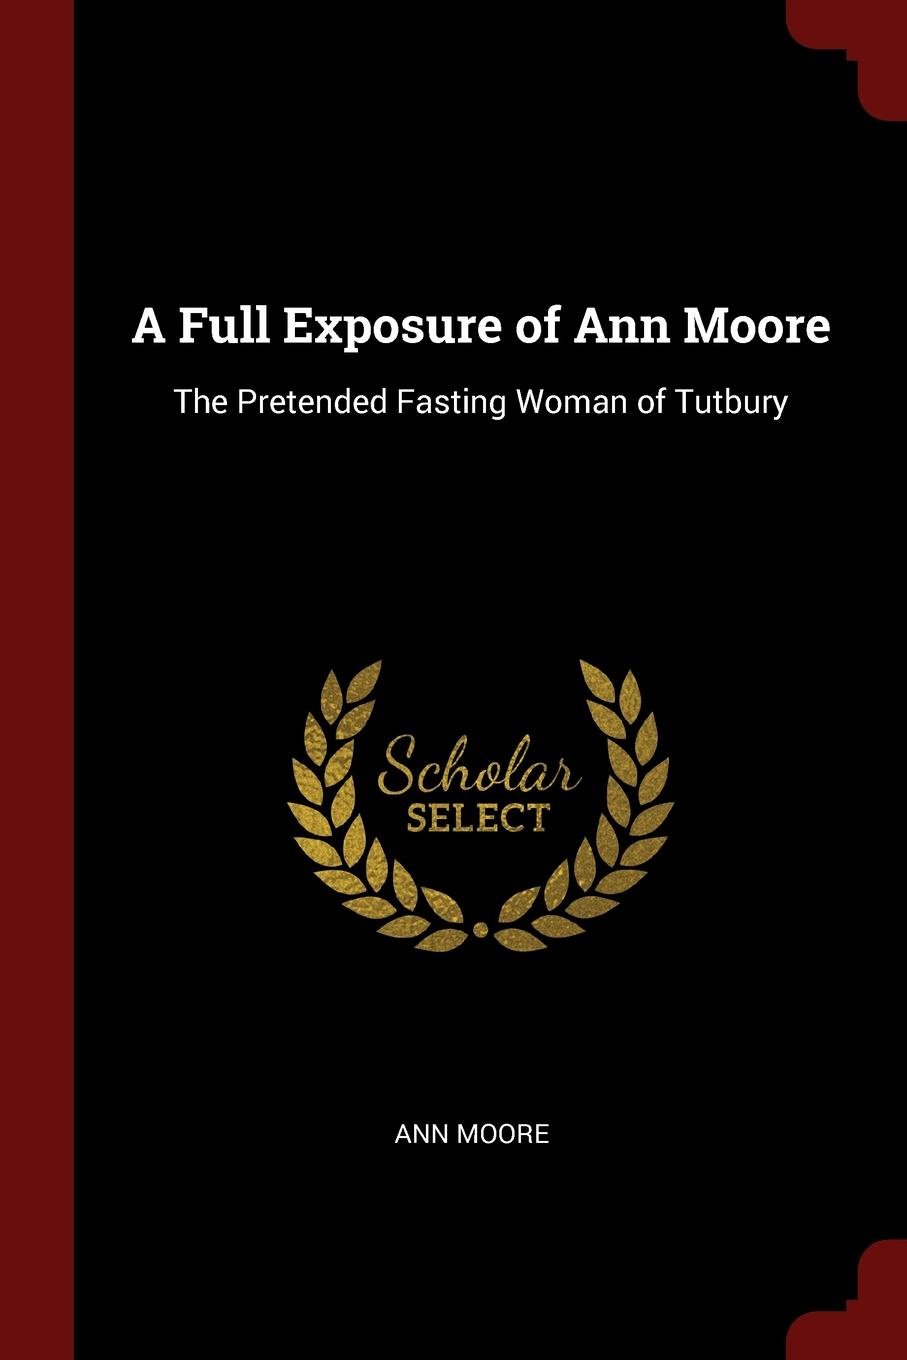 A Full Exposure of Ann Moore. The Pretended Fasting Woman of Tutbury